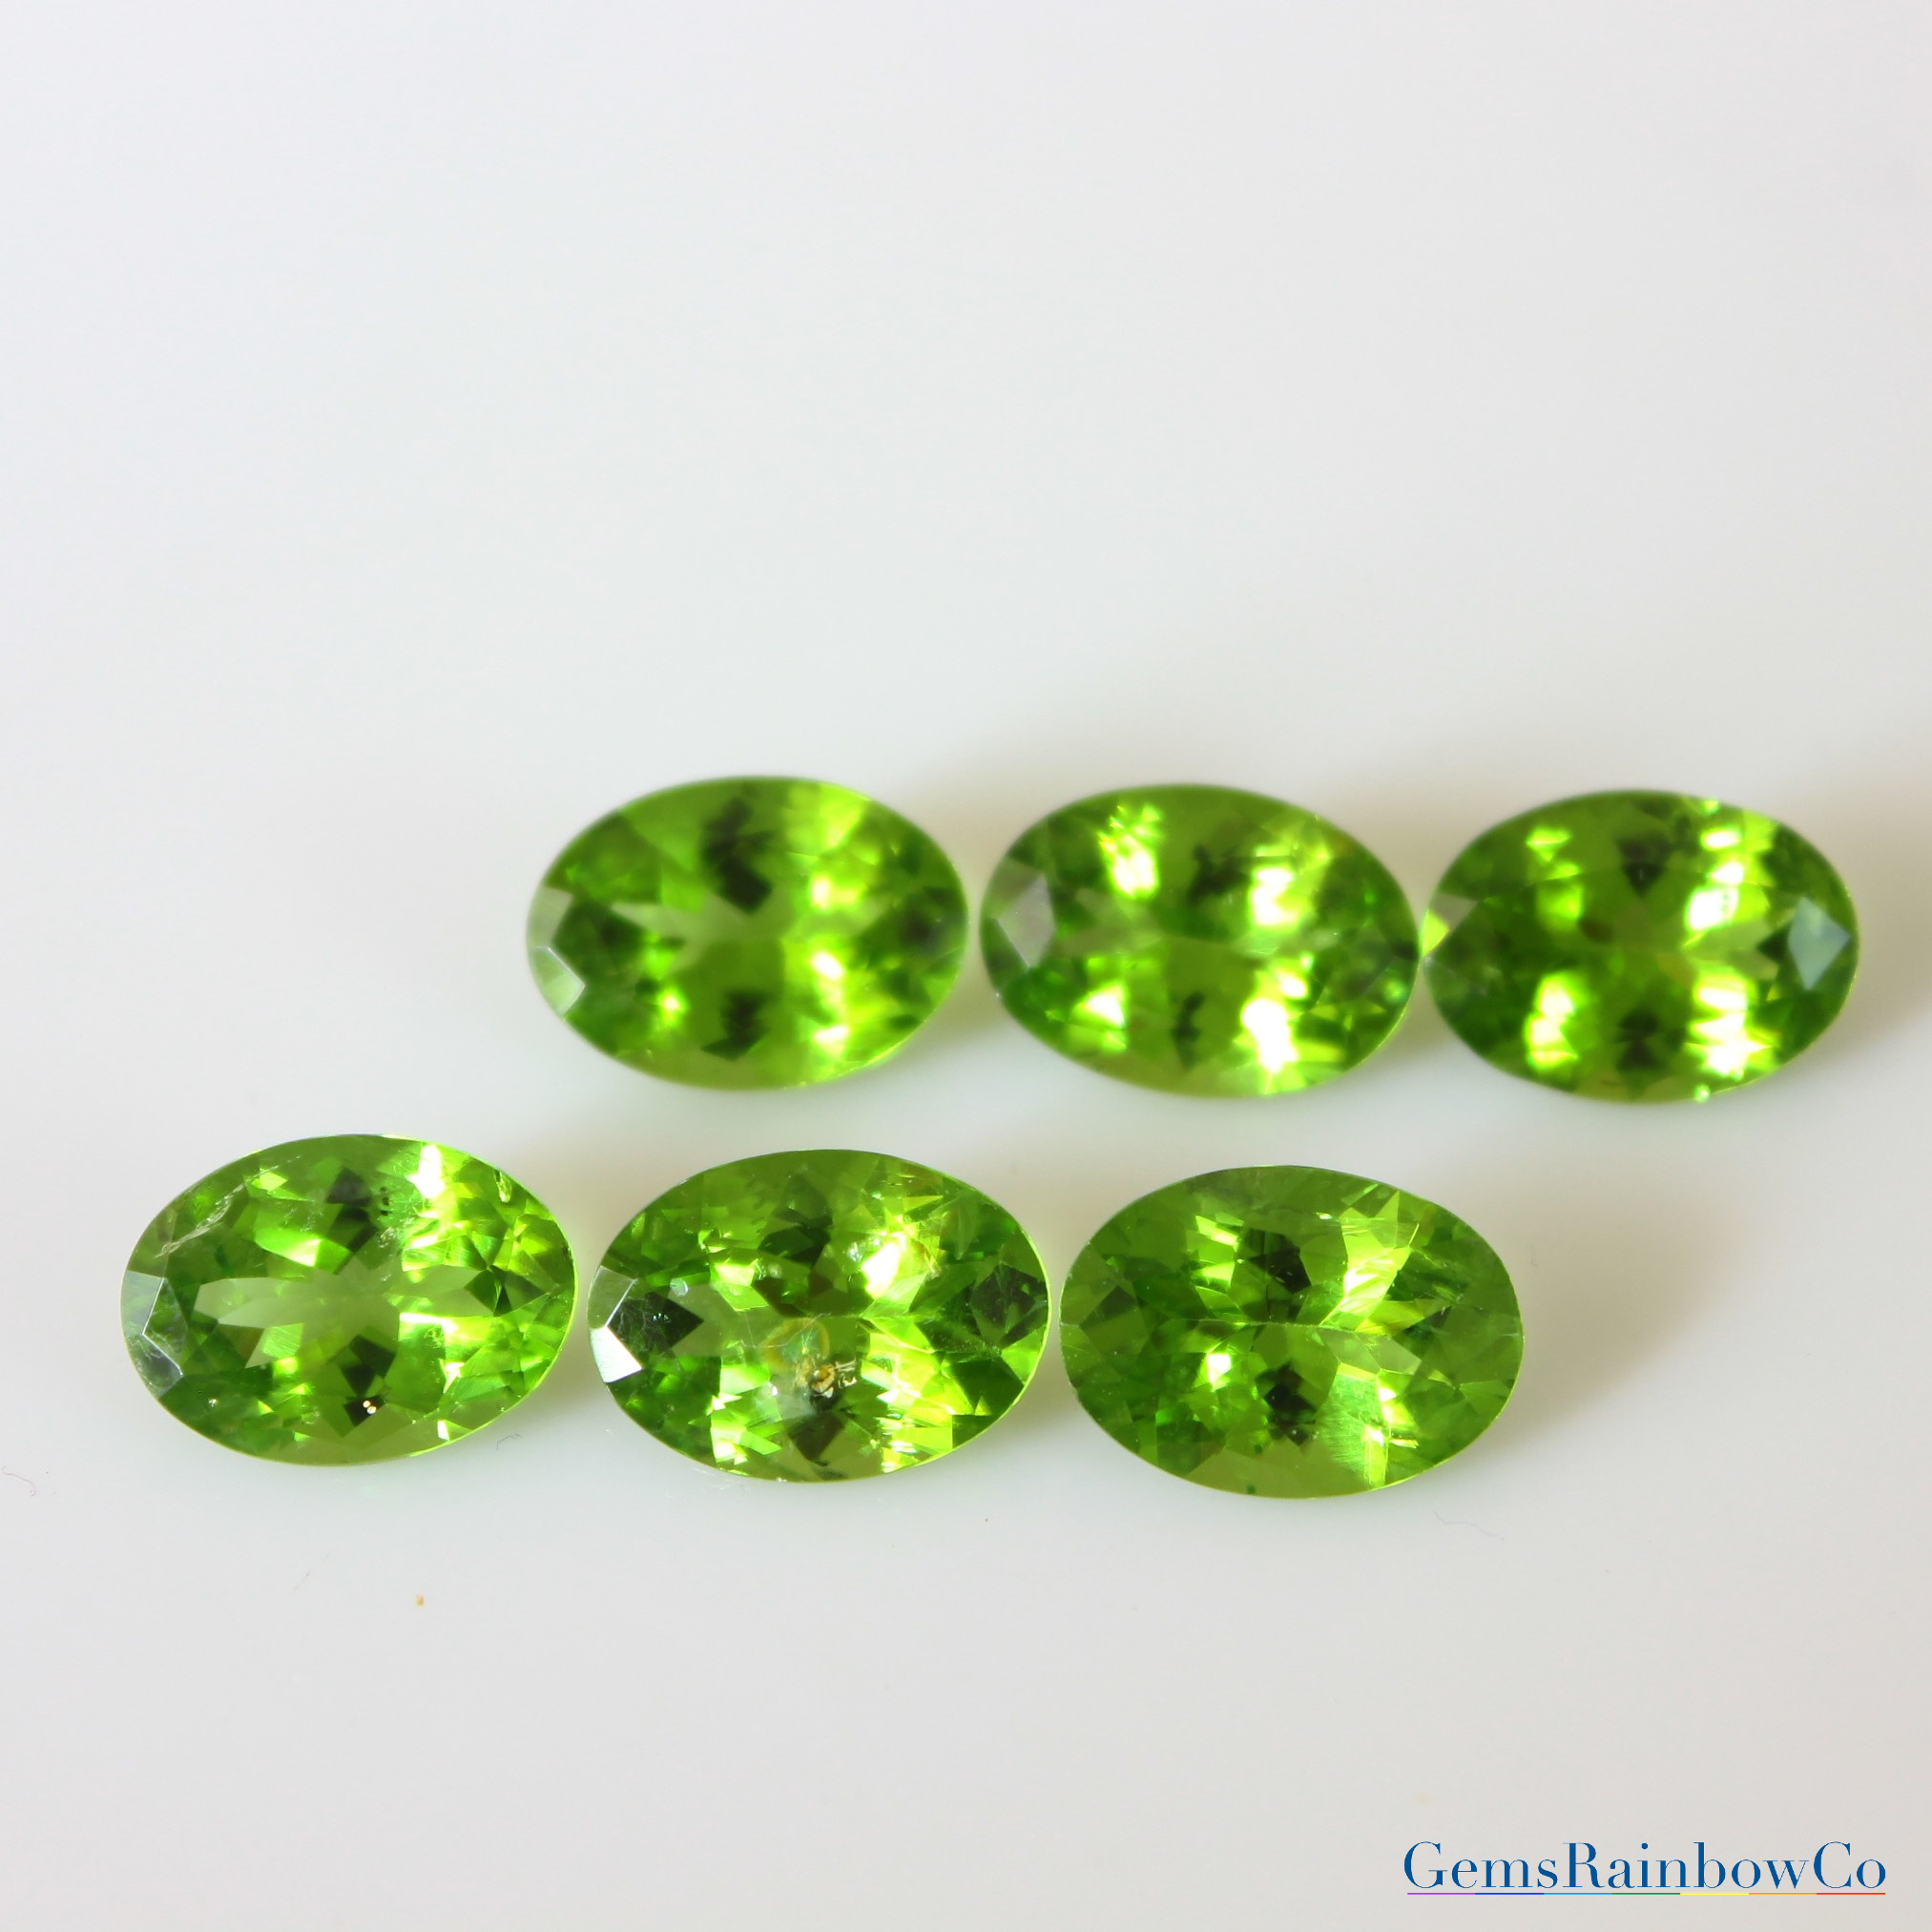 10 Pcs 52.50 Cts Natural Crystal Oval Cut Loose Gemstones 10 X 14 MM Oval P-381 